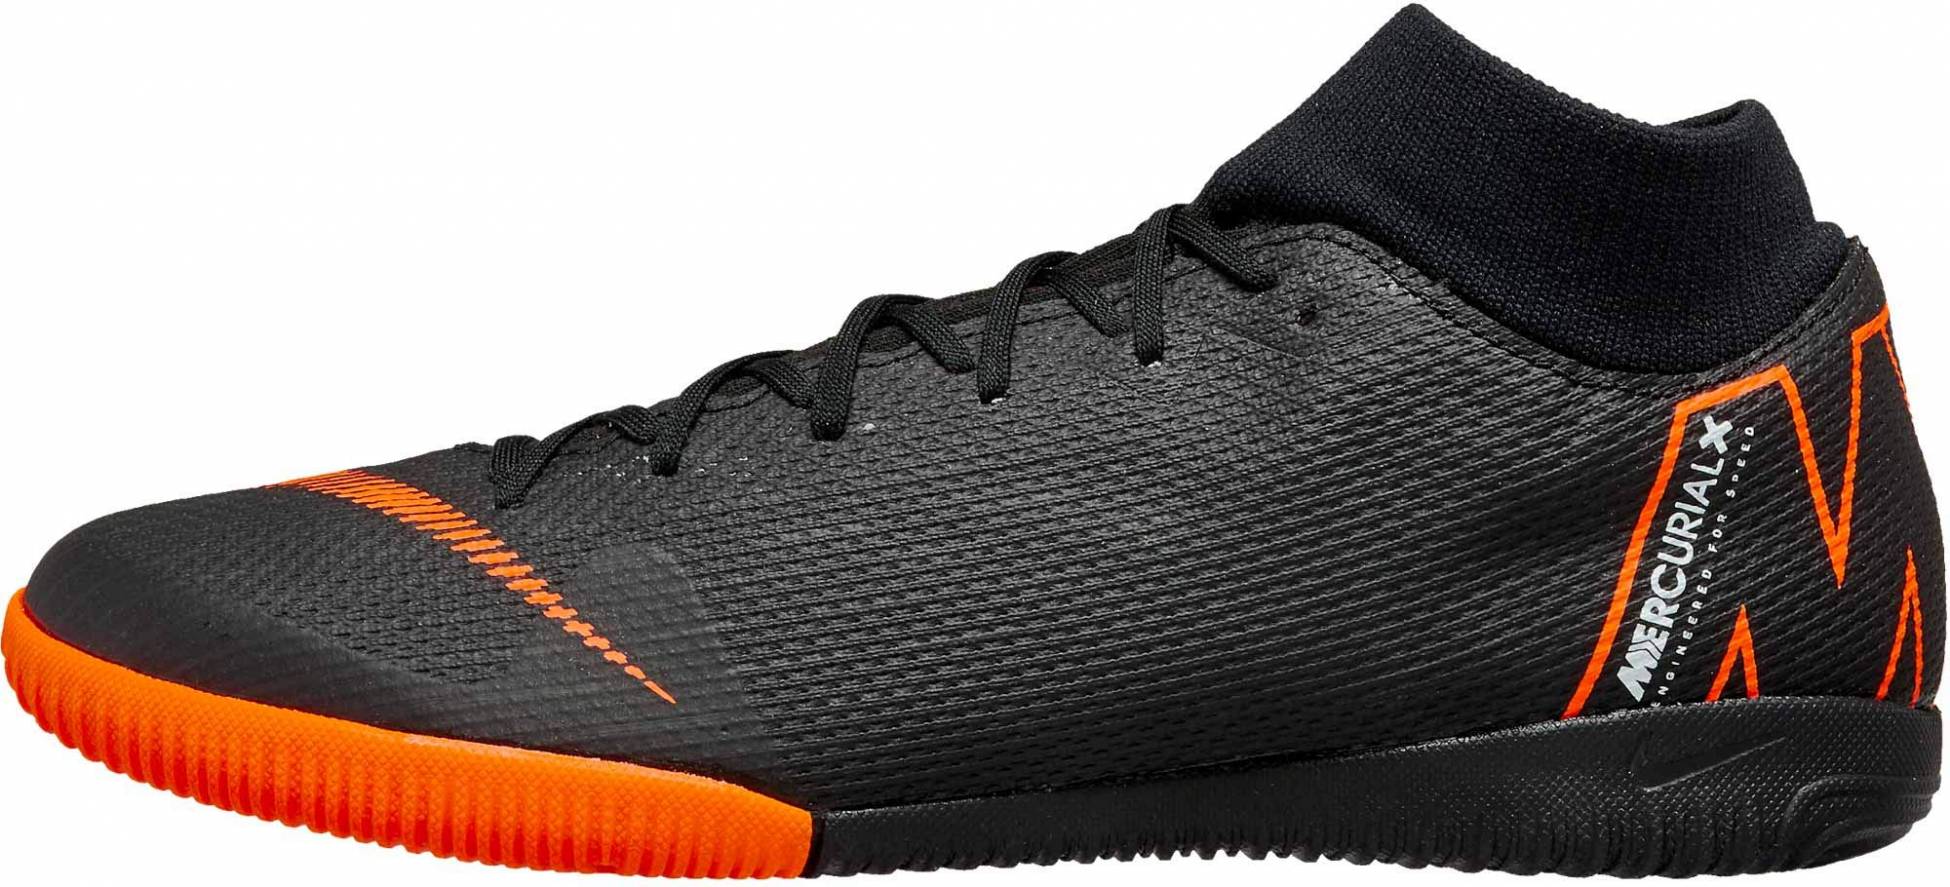 Save 37% on Nike Indoor Soccer Cleats 